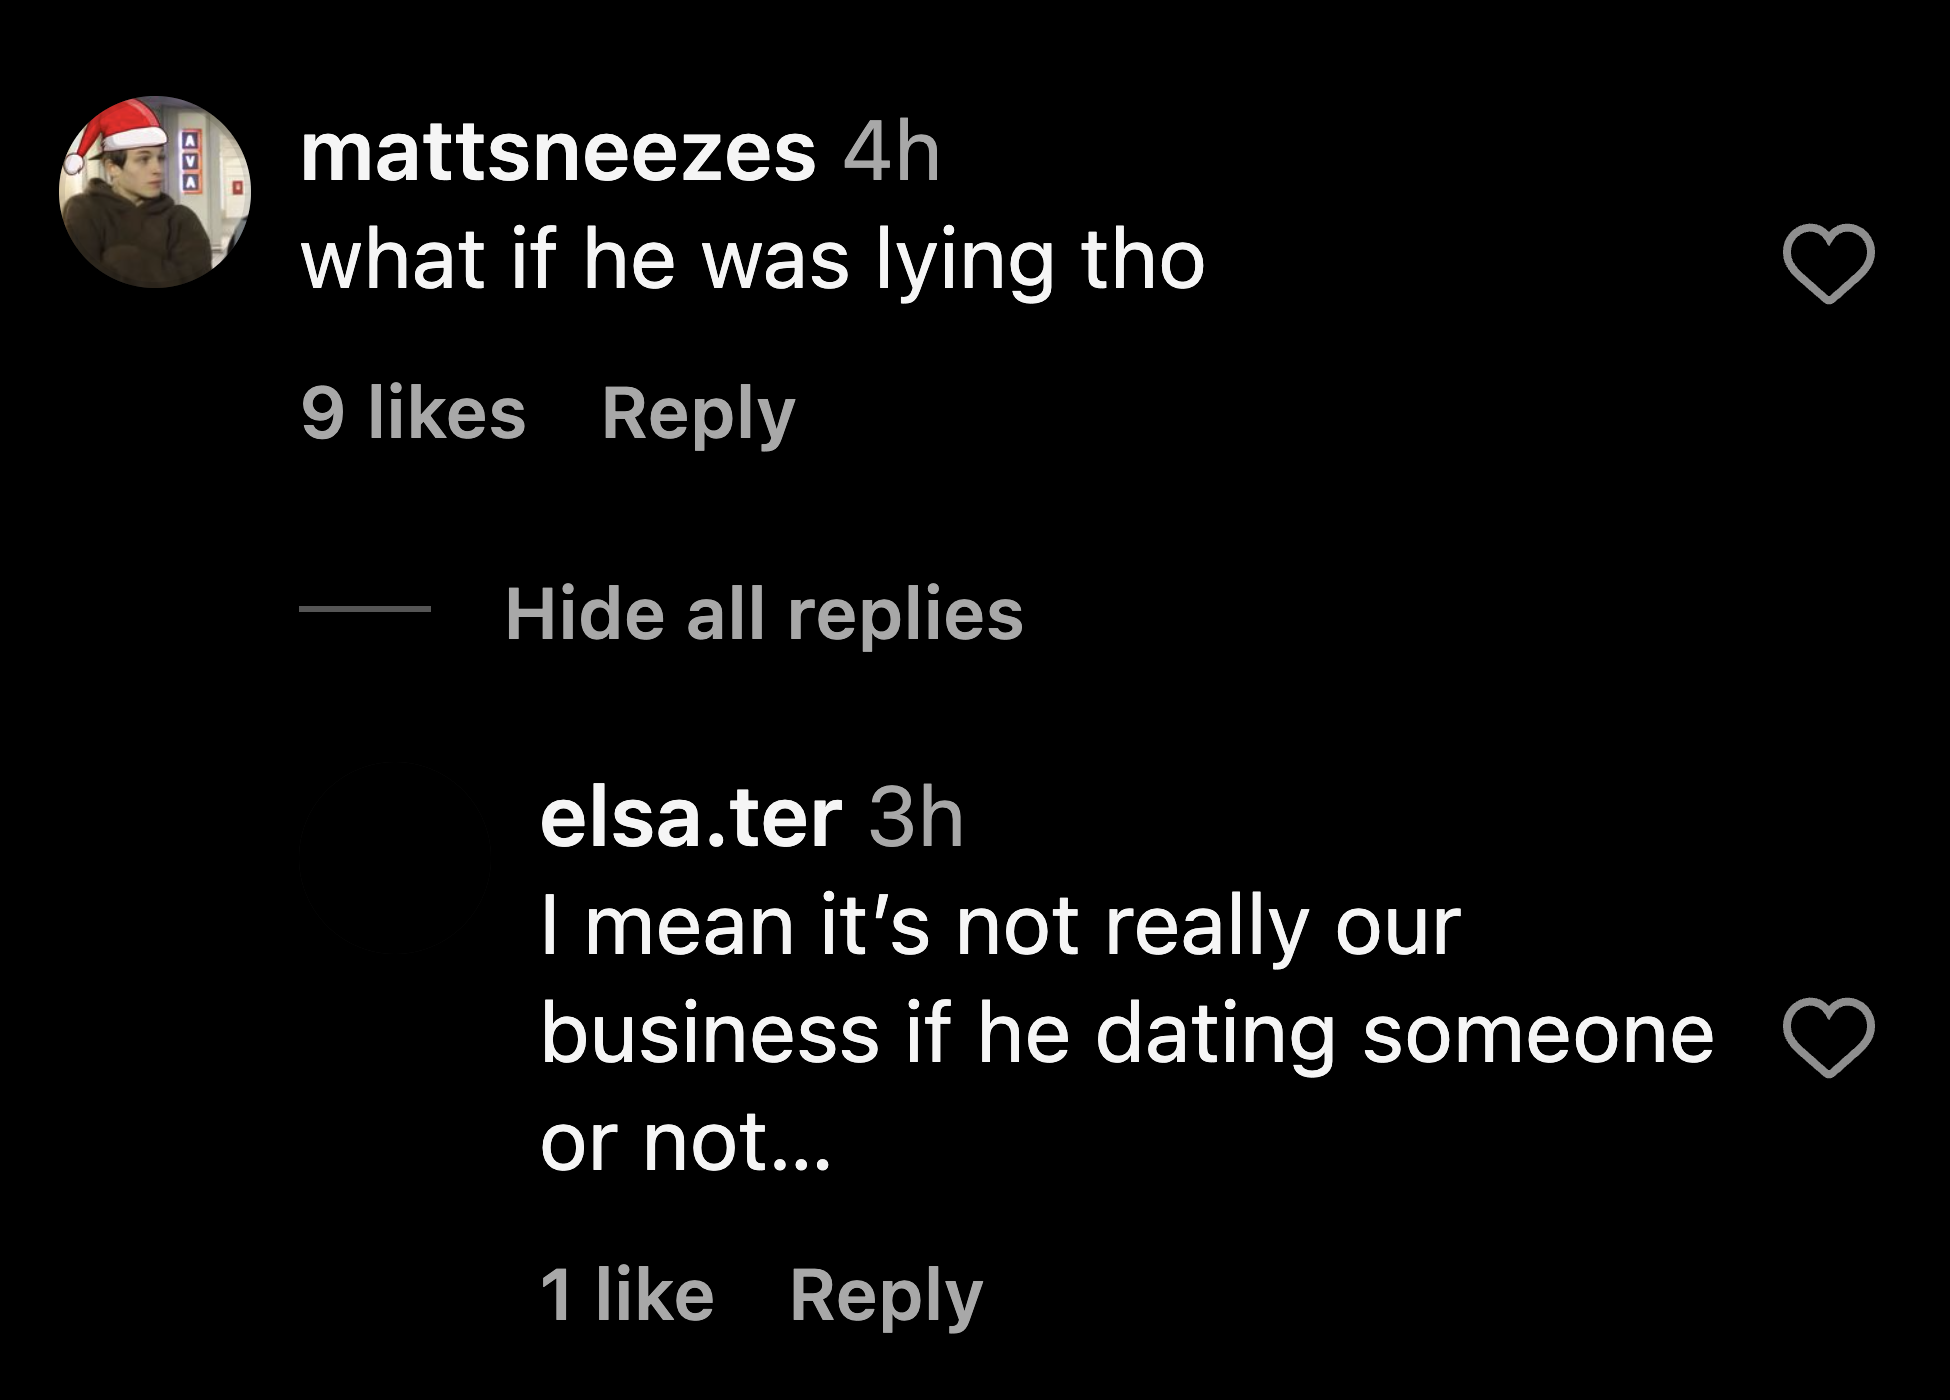 Netizen’s on Matthew Sturniolo’s comments about his dating life.